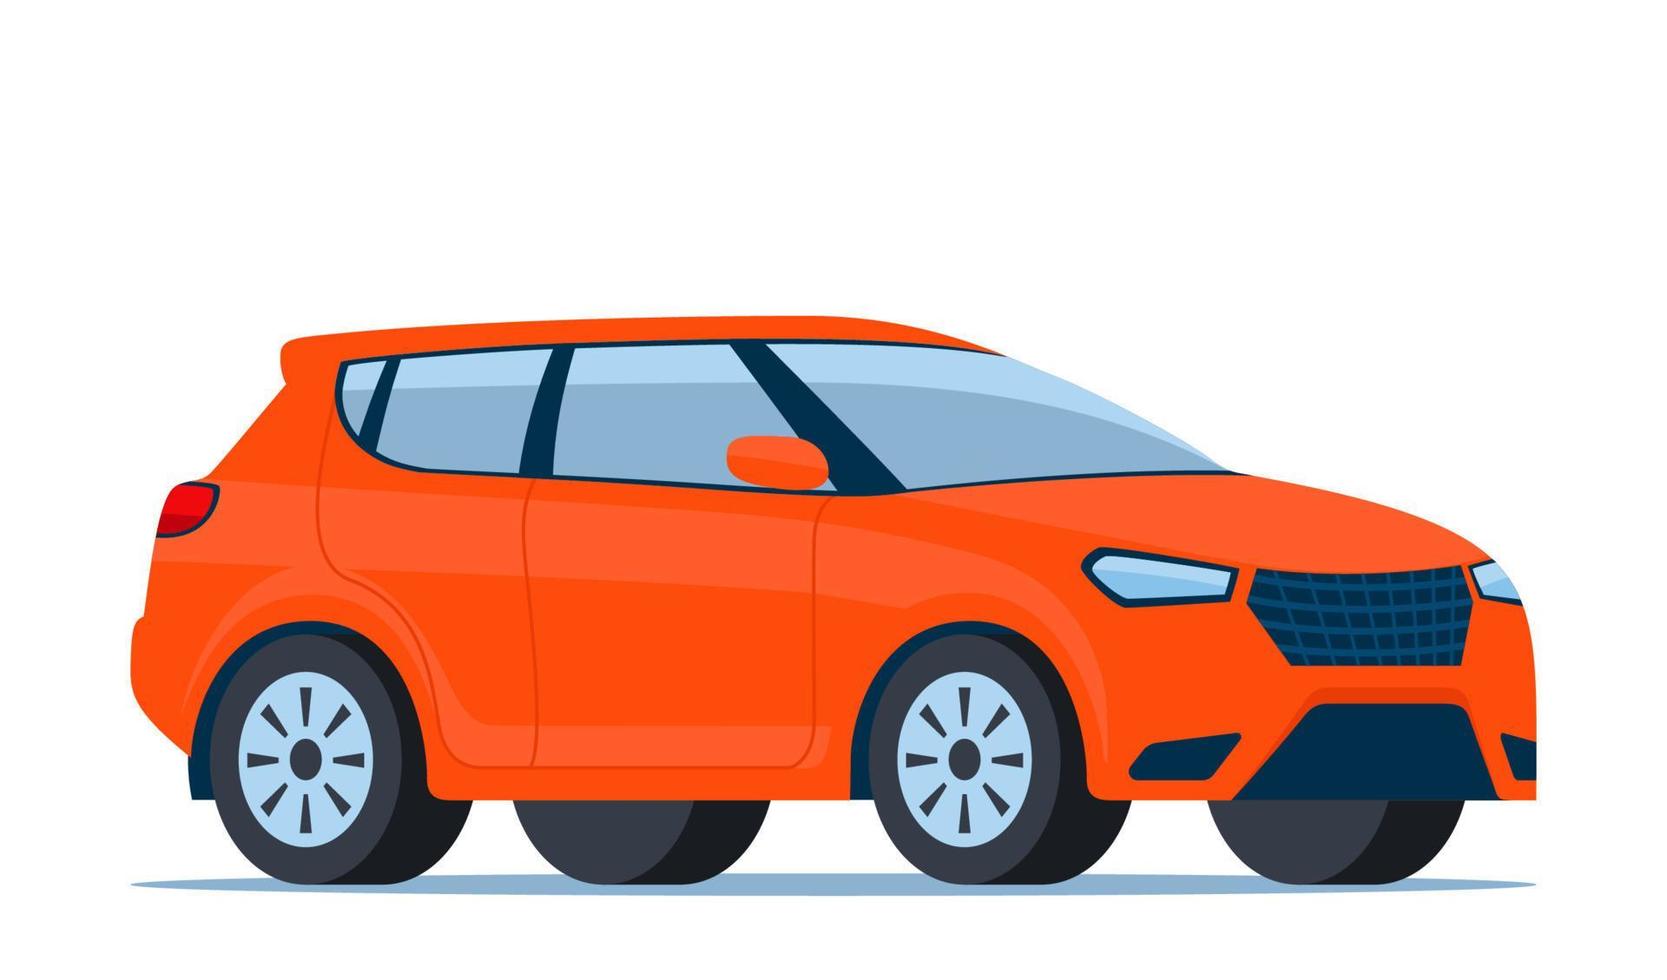 Red modern Suv car, side view. Vector illustration.